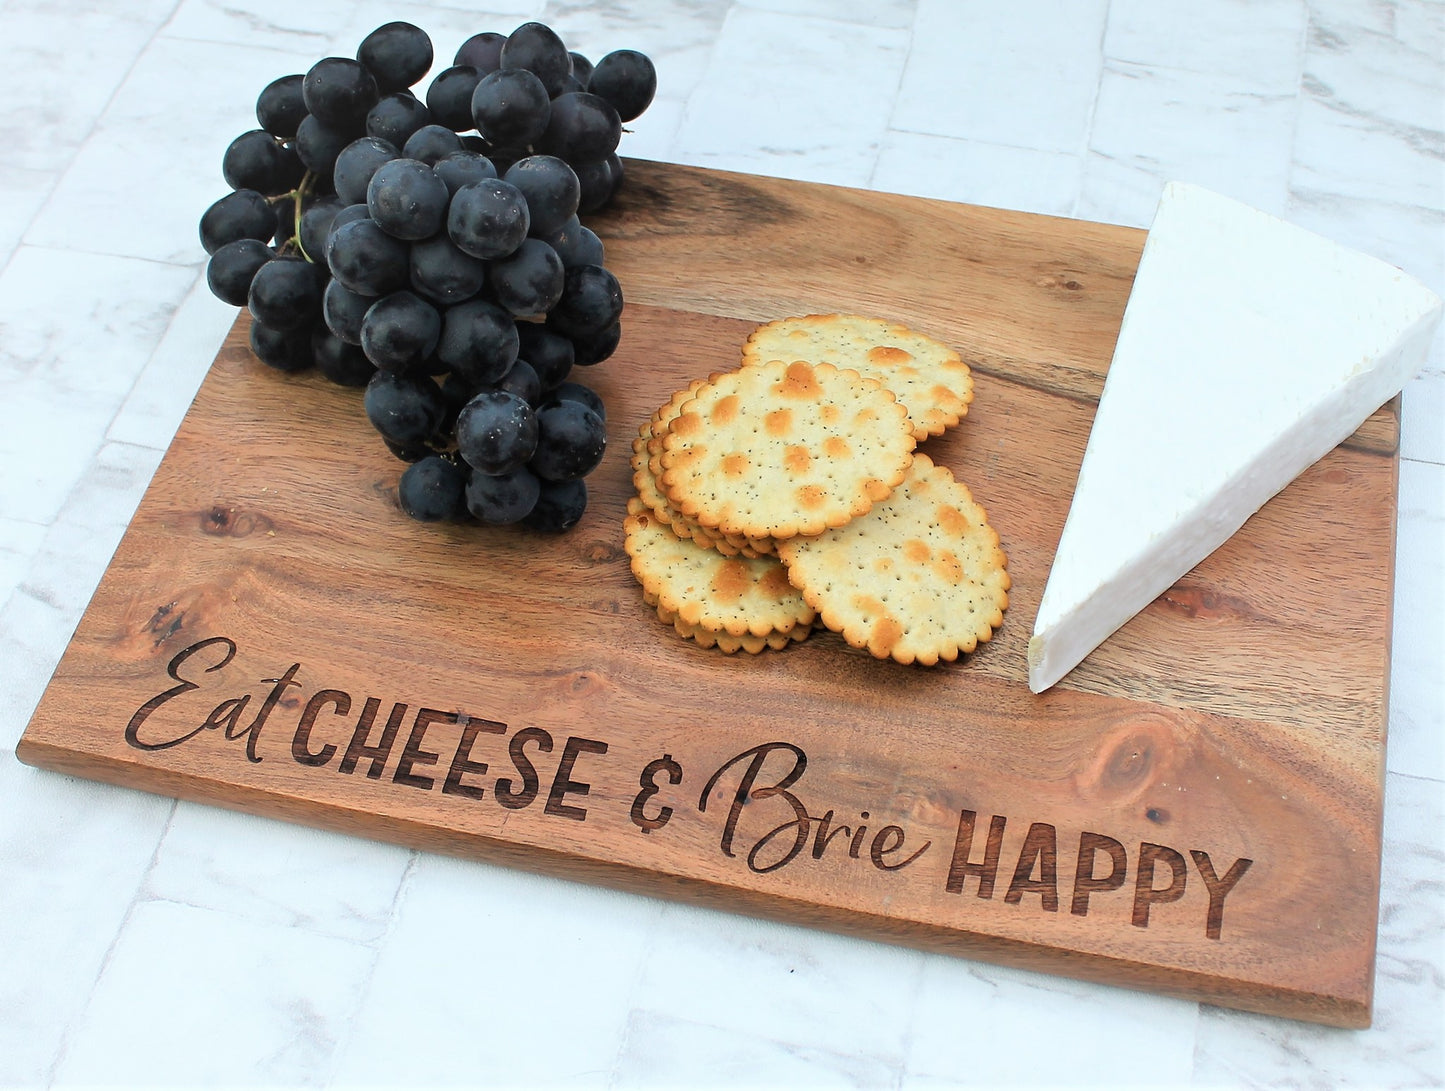 Wooden engraved chopping board with the words eat cheese and brie happy